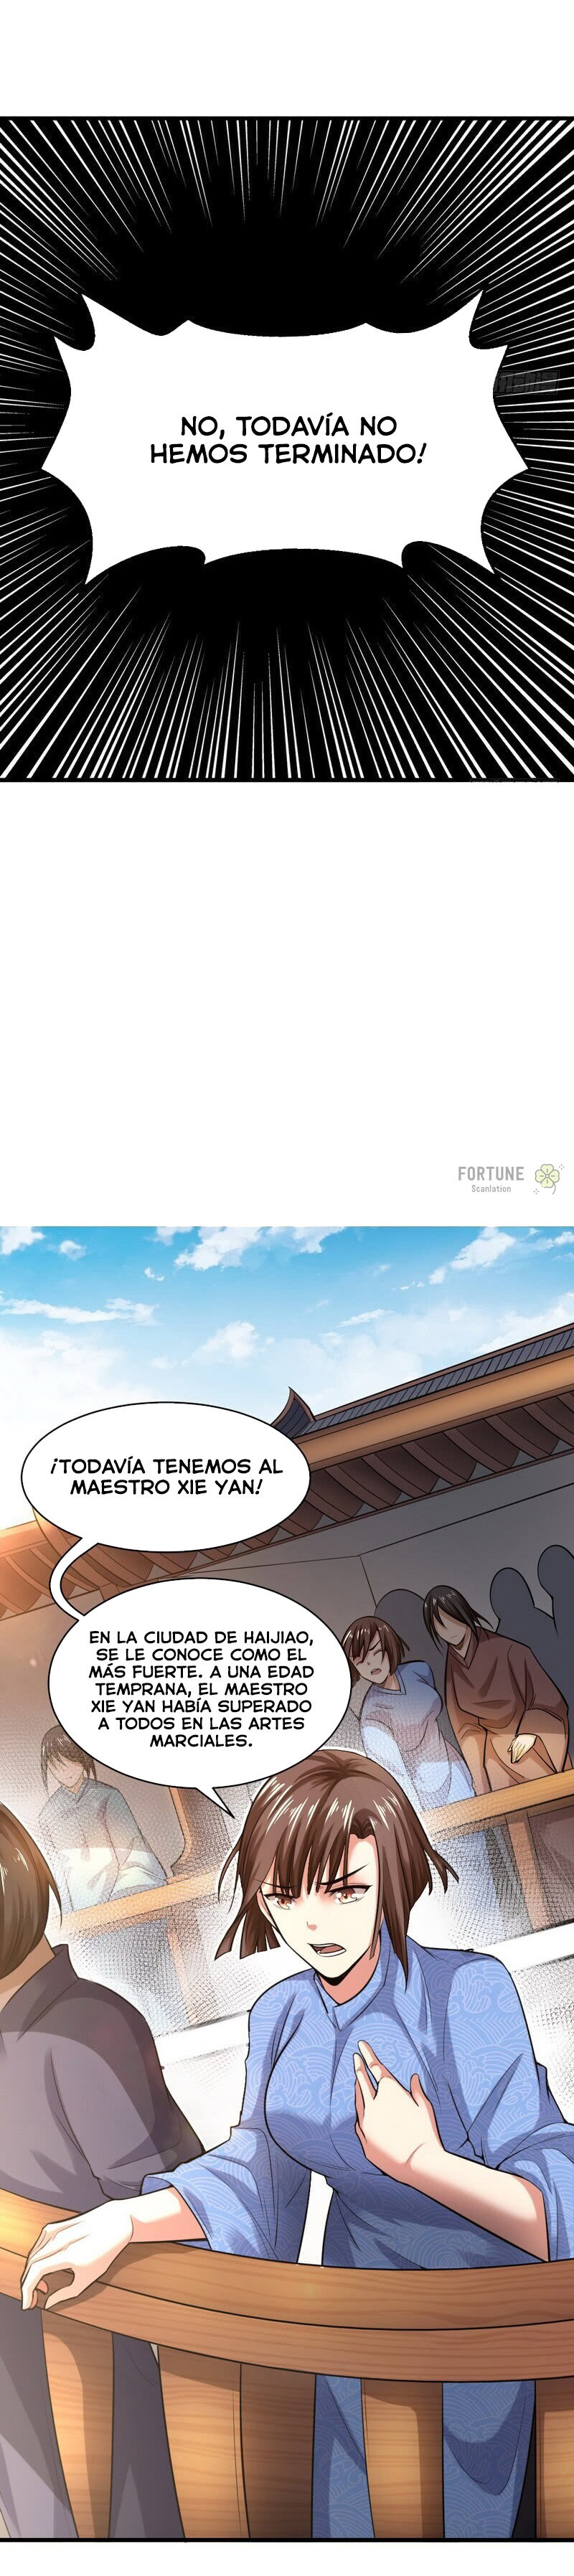 Manga Soy un dios maligno Chapter 19 image number 13